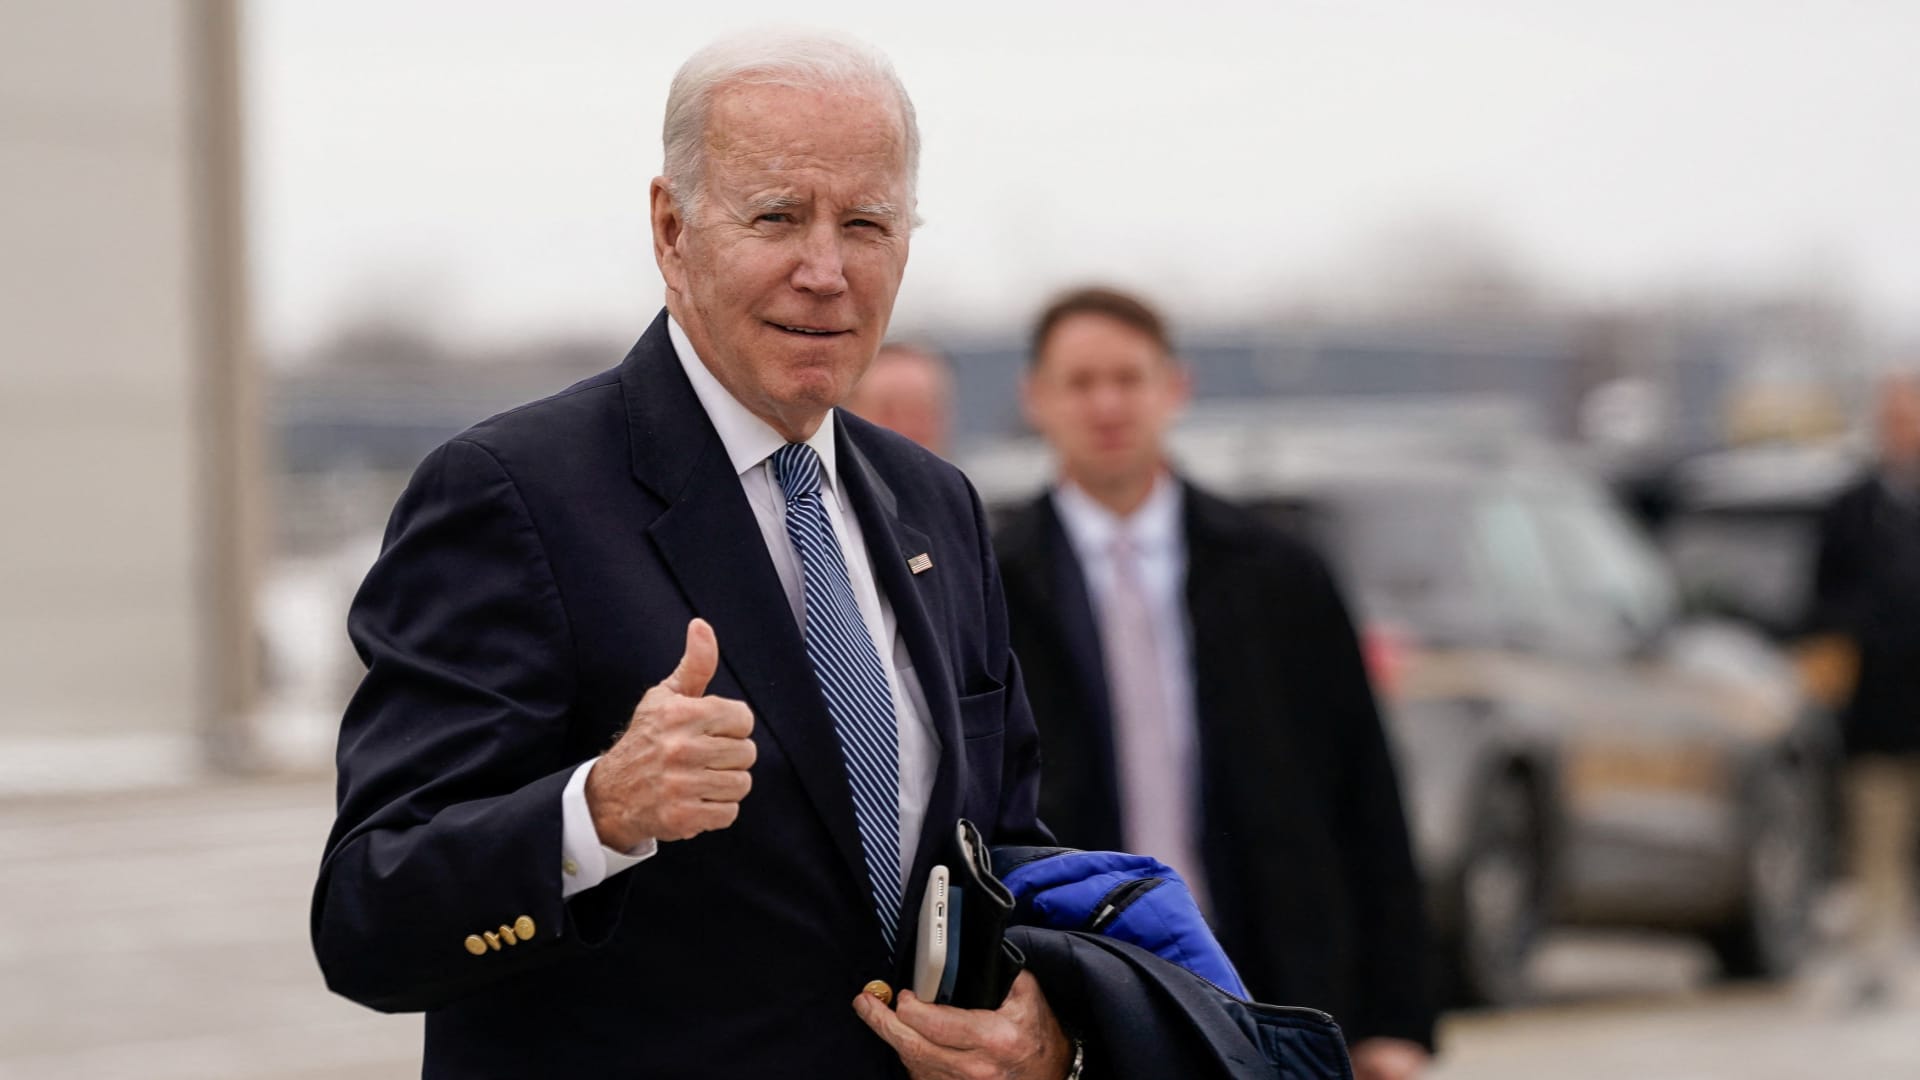 Biden to deliver State of the Union address amid high inflation and divided Congress that threaten to derail economy